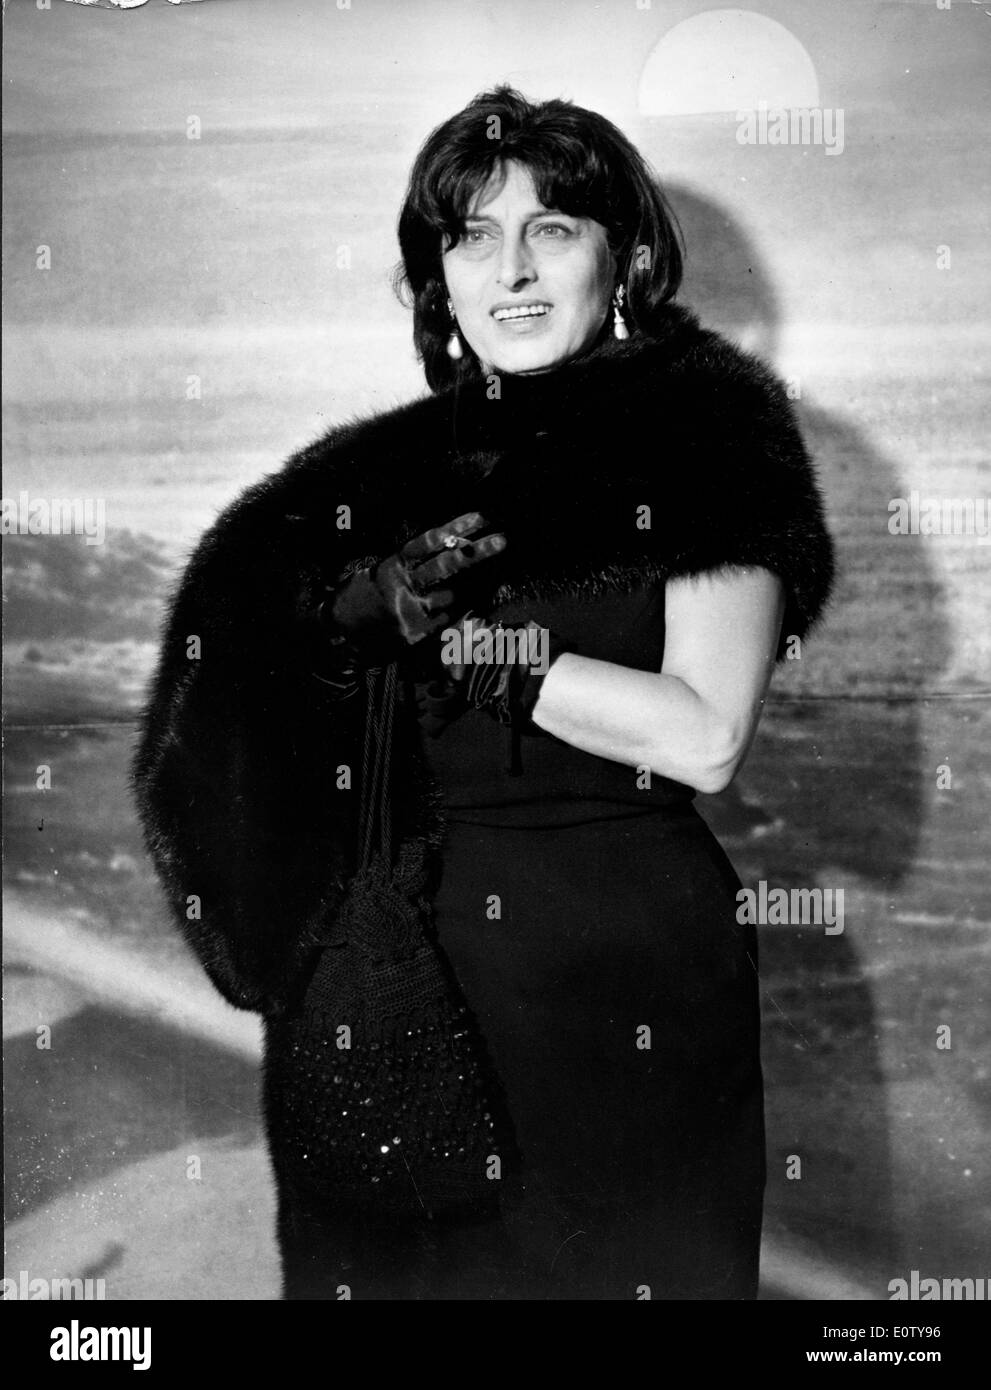 Actress Anna Magnani on stage at event Stock Photo